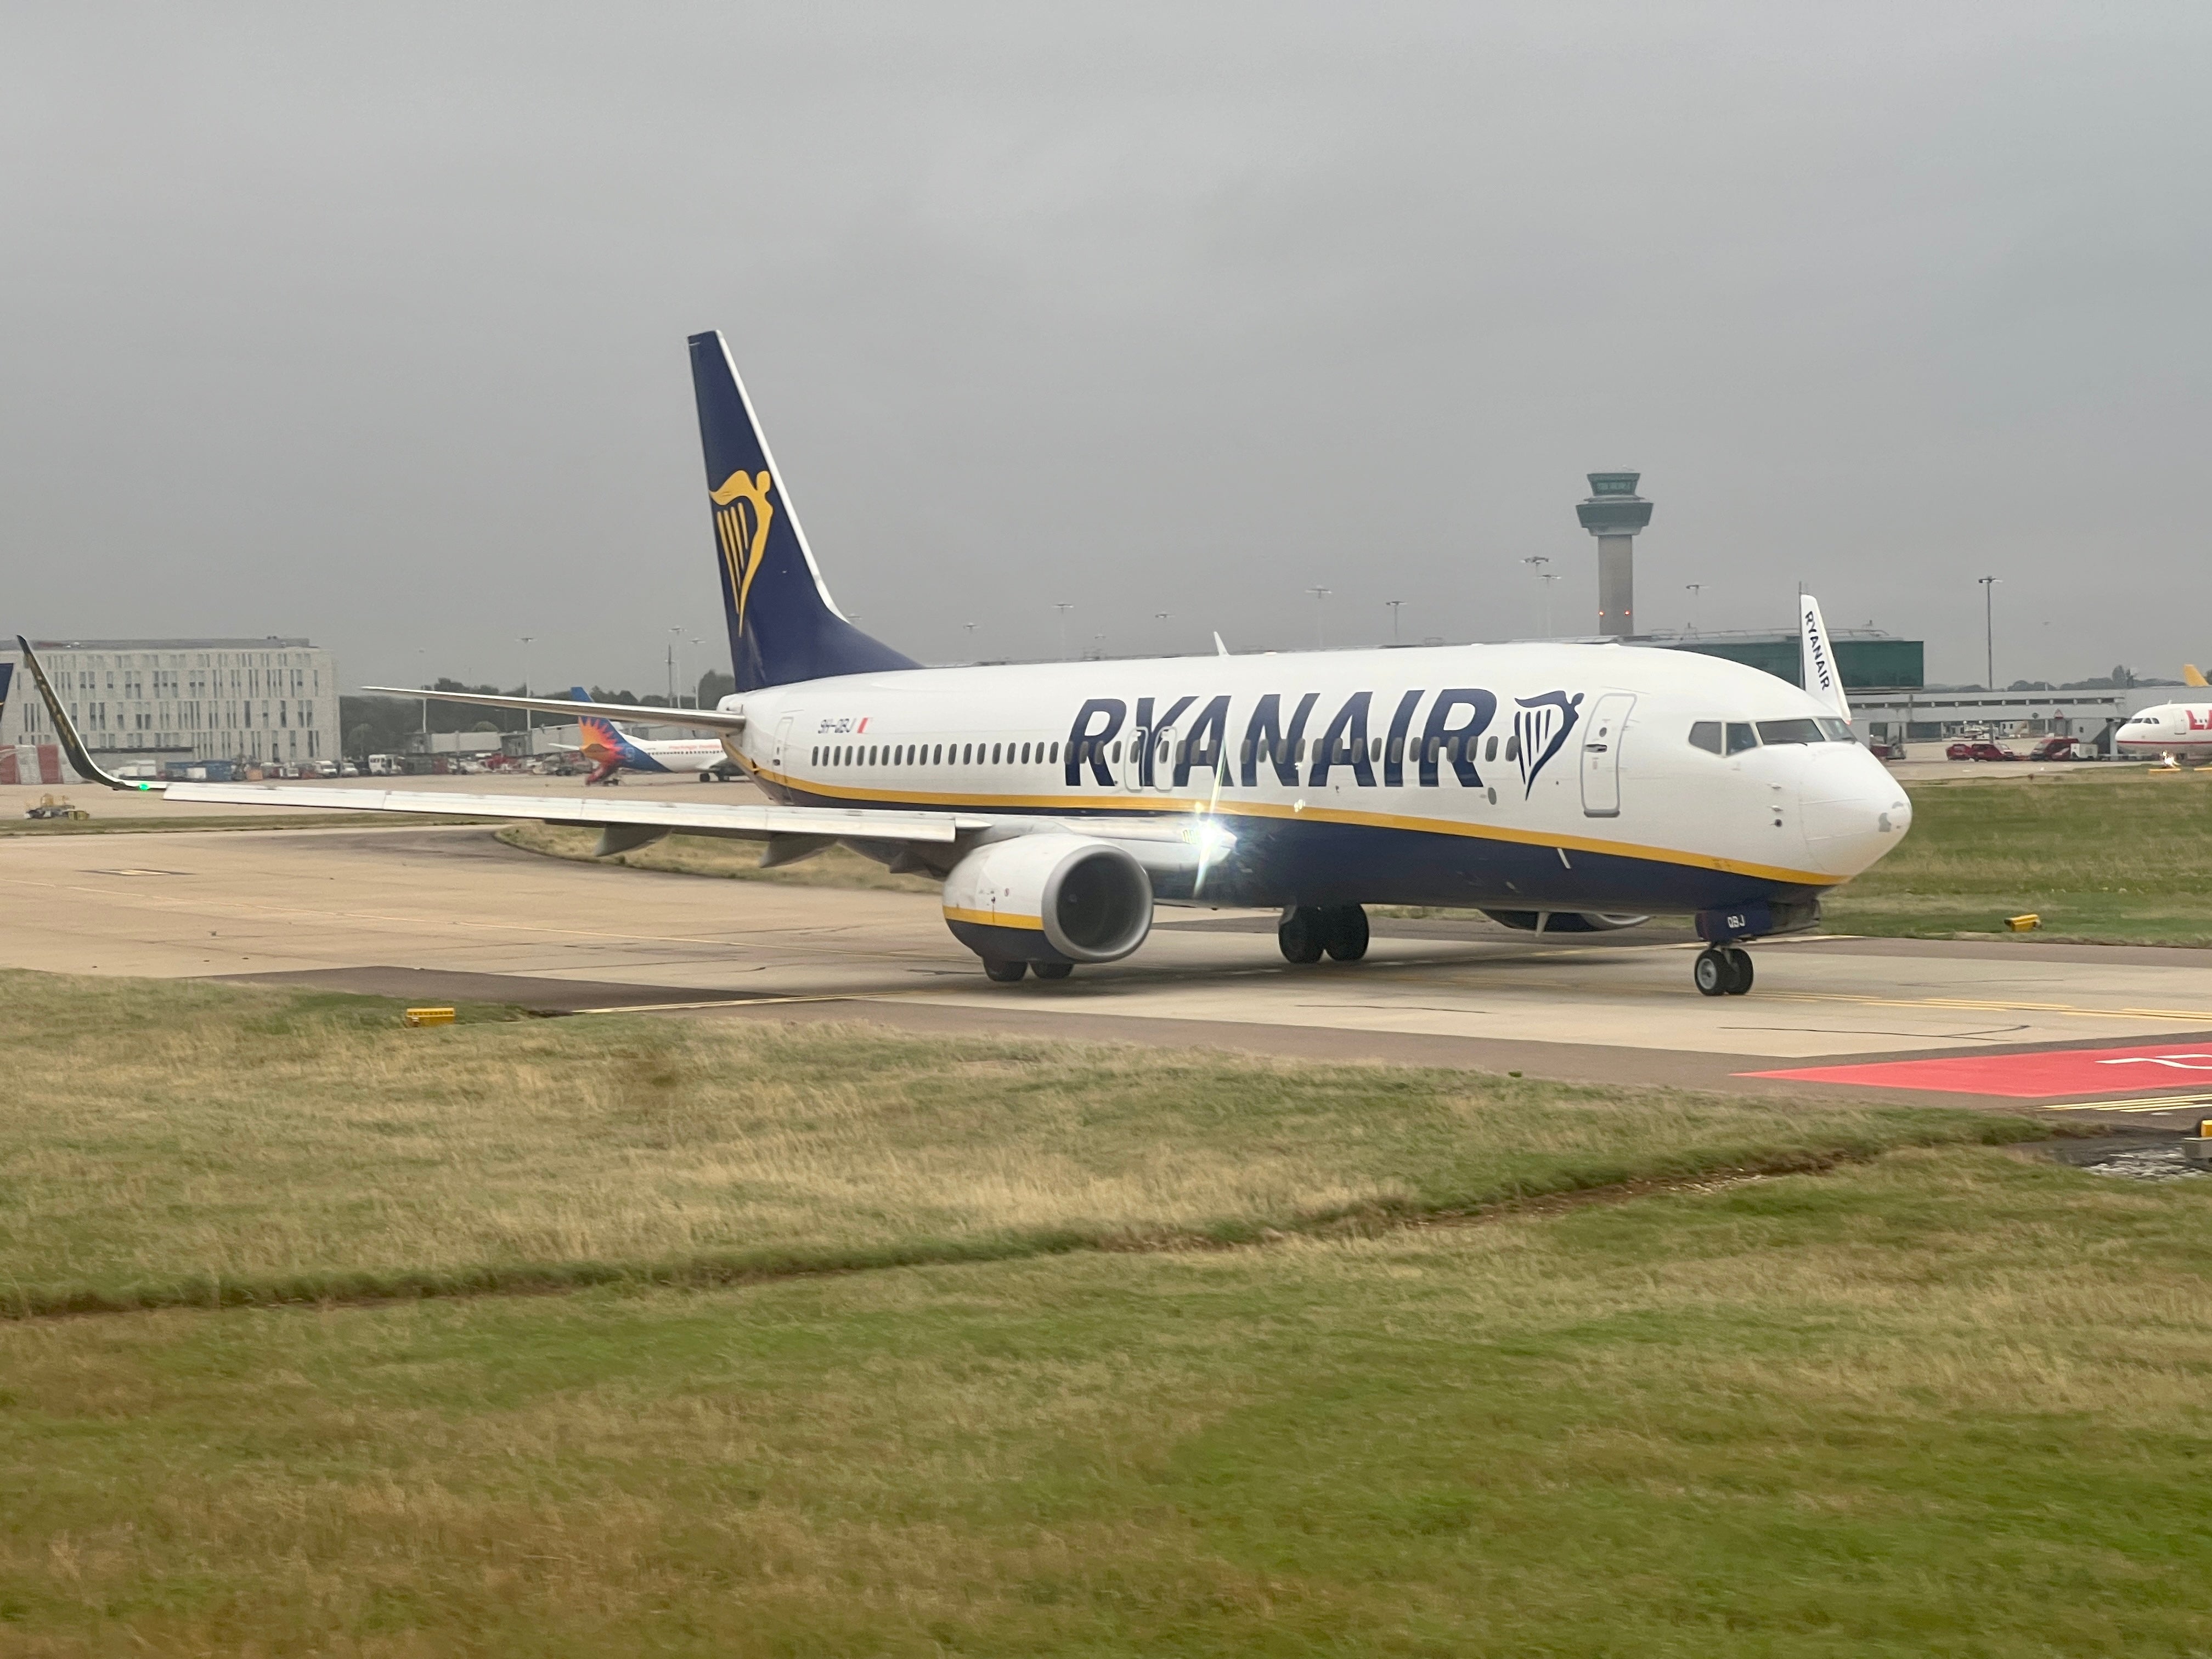 Going south? Ryanair flights from its main base at London Stansted are subject to delays and cancellations due to striking French air-traffic controllers